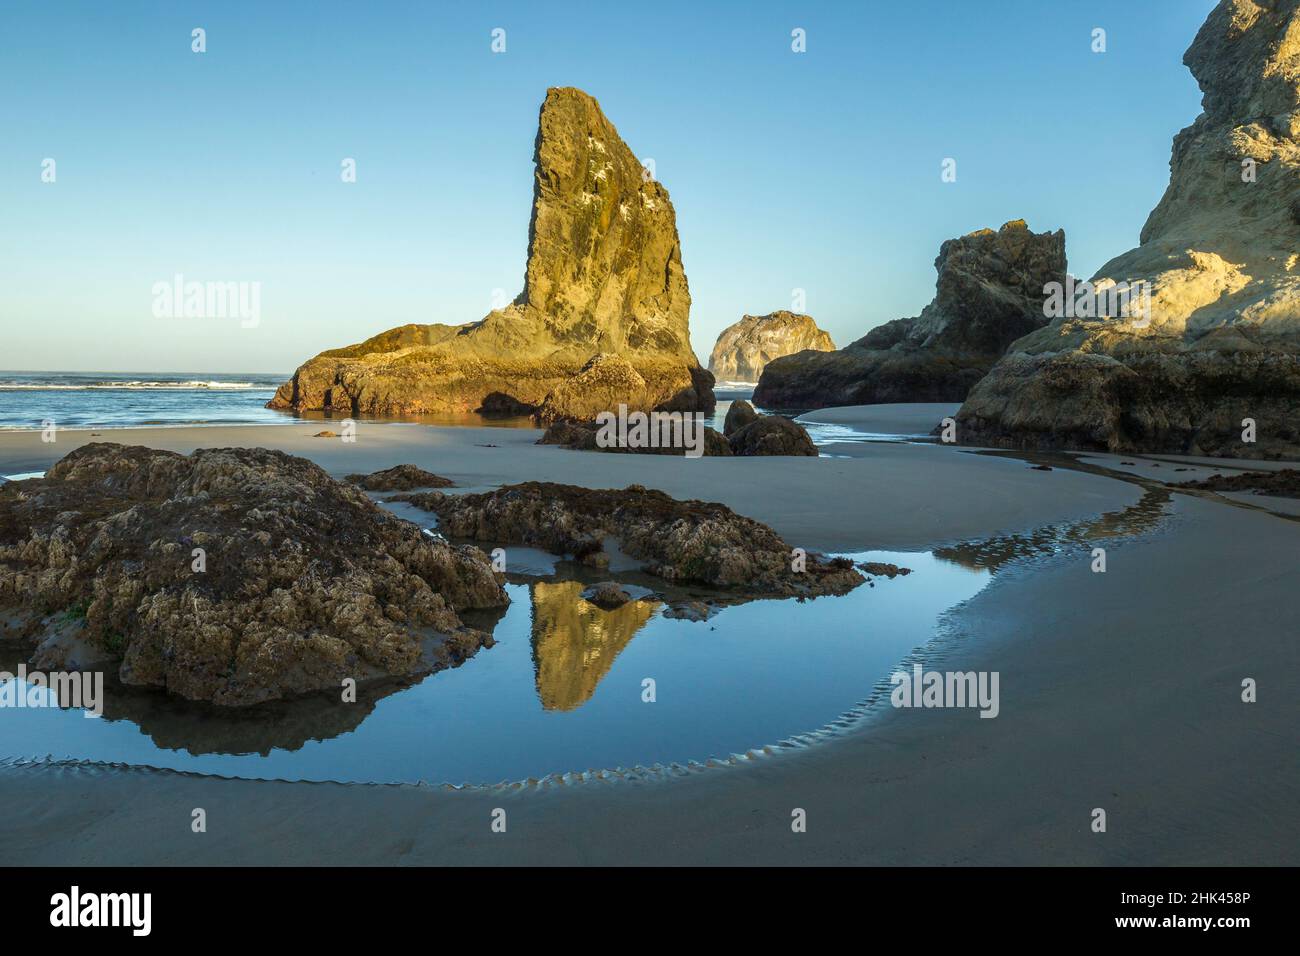 USA, Oregon, Bandon Beach. Rock formations and reflection in beach water. Credit as: Cathy & Gordon Illg / Jaynes Gallery / DanitaDelimont.com Stock Photo